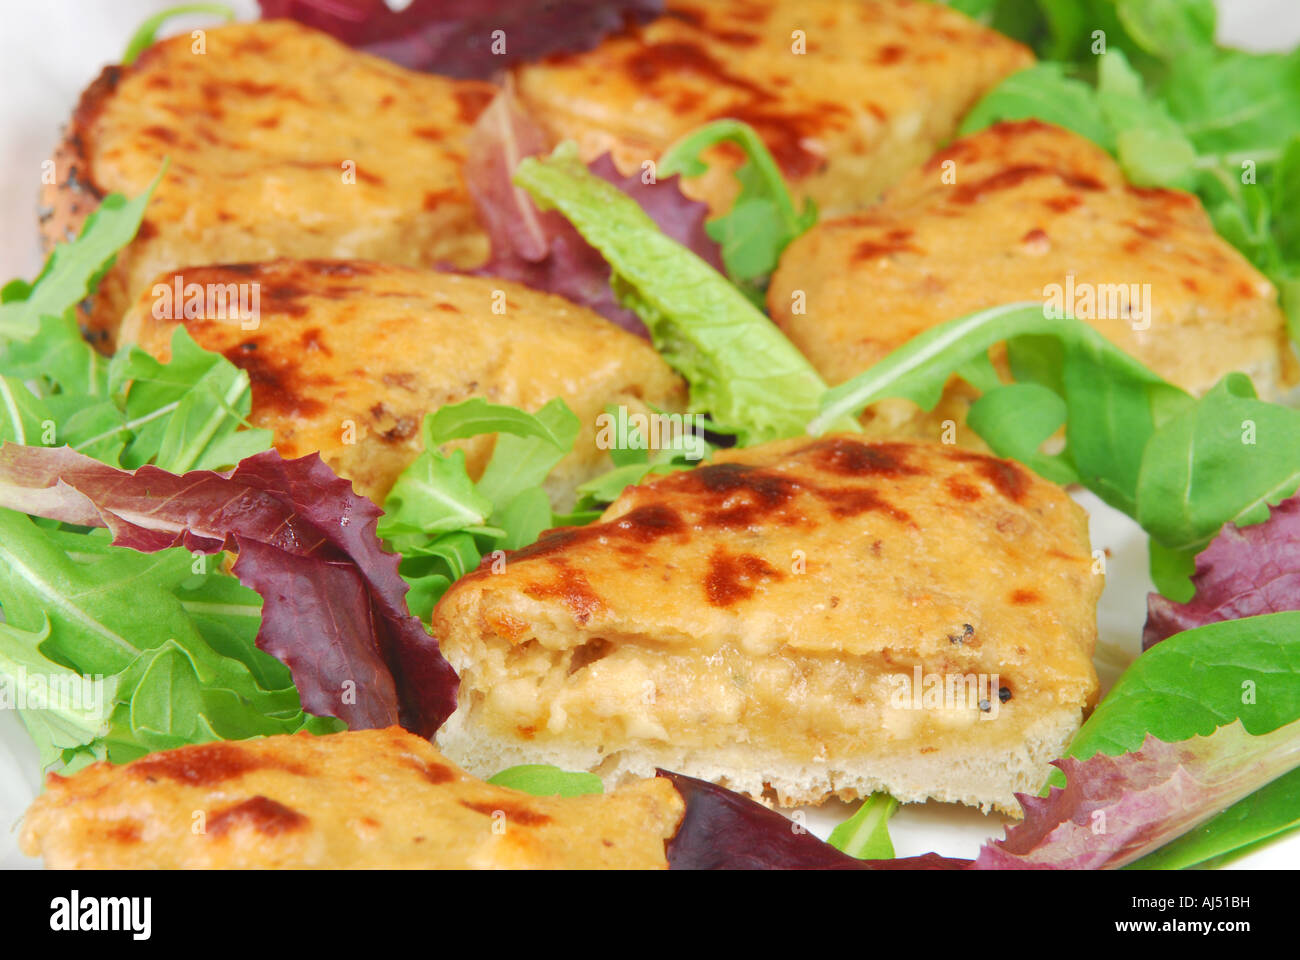 Canapes of Welsh rarebit on toast with salad Stock Photo